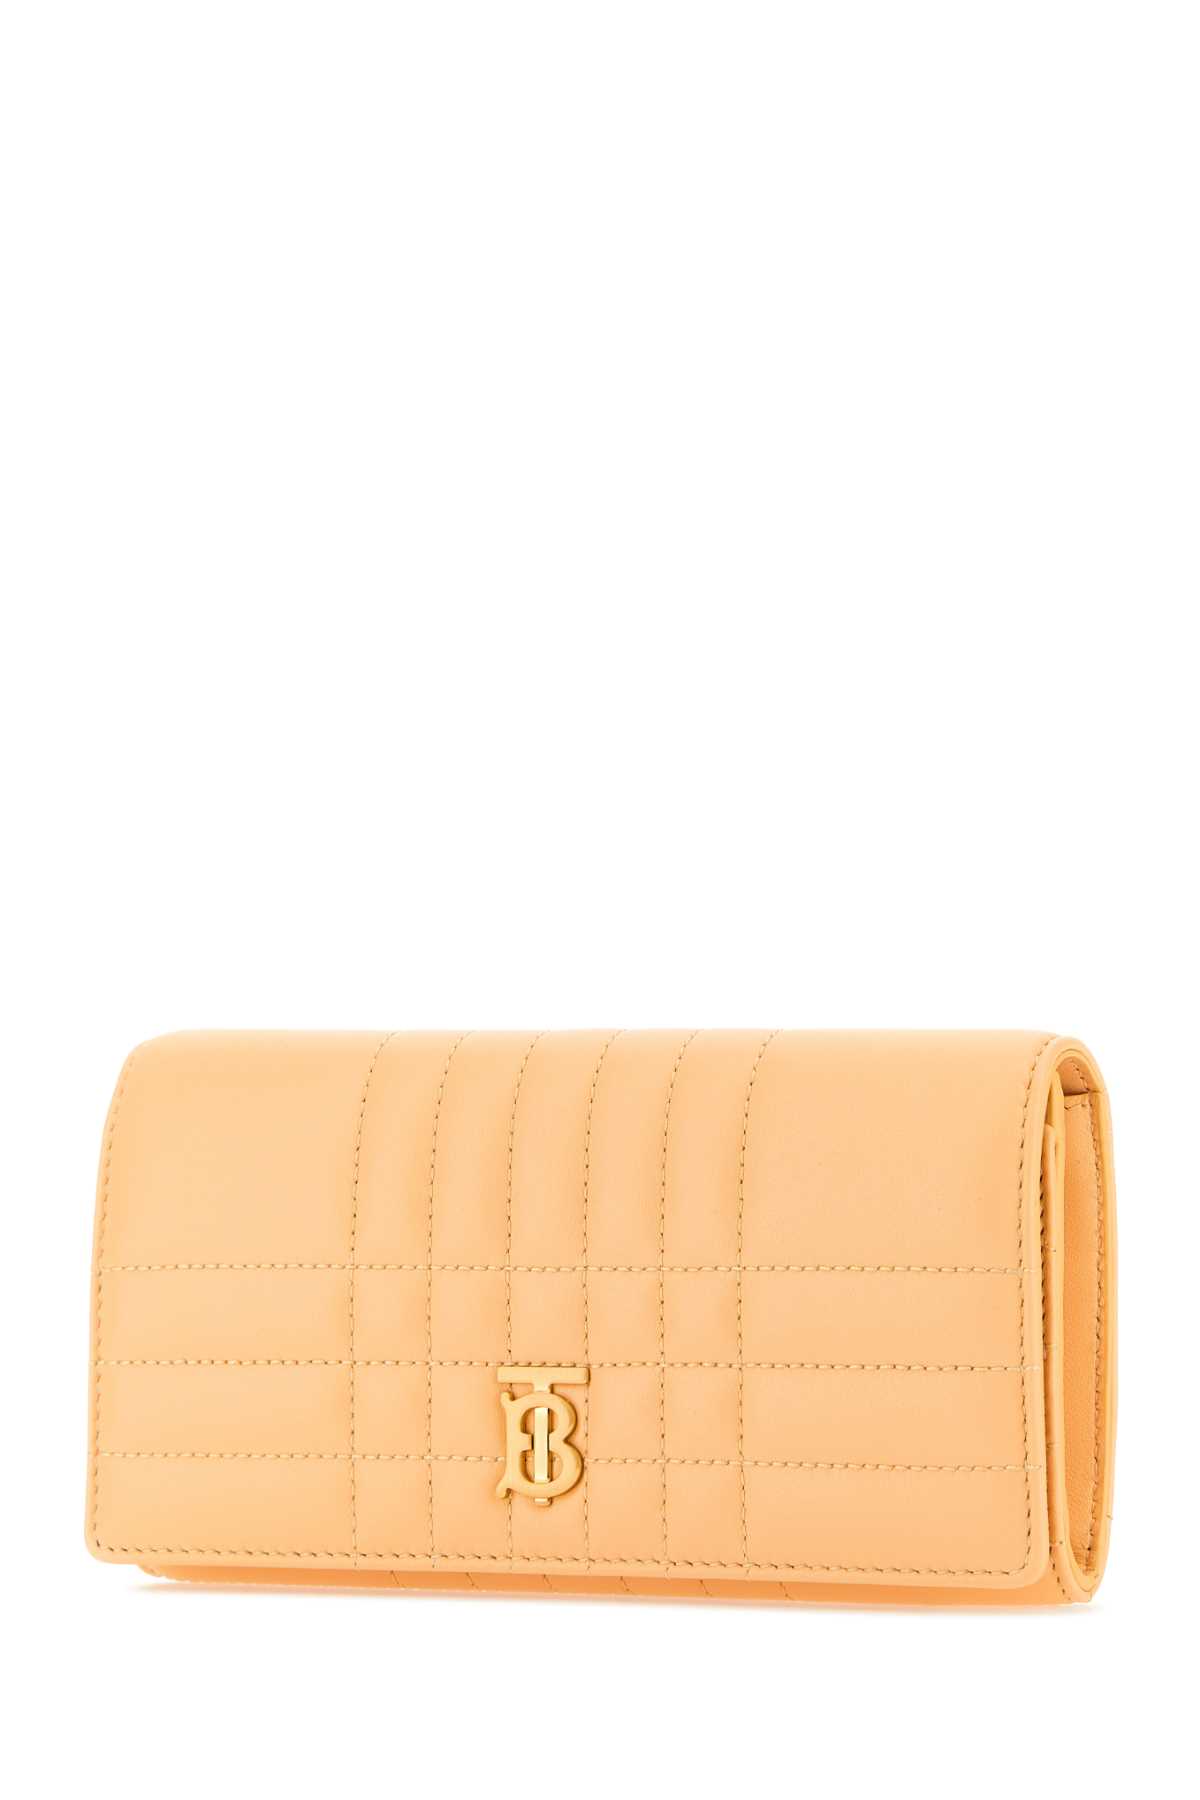 Shop Burberry Peach Leather Lola Wallet In Goldensand